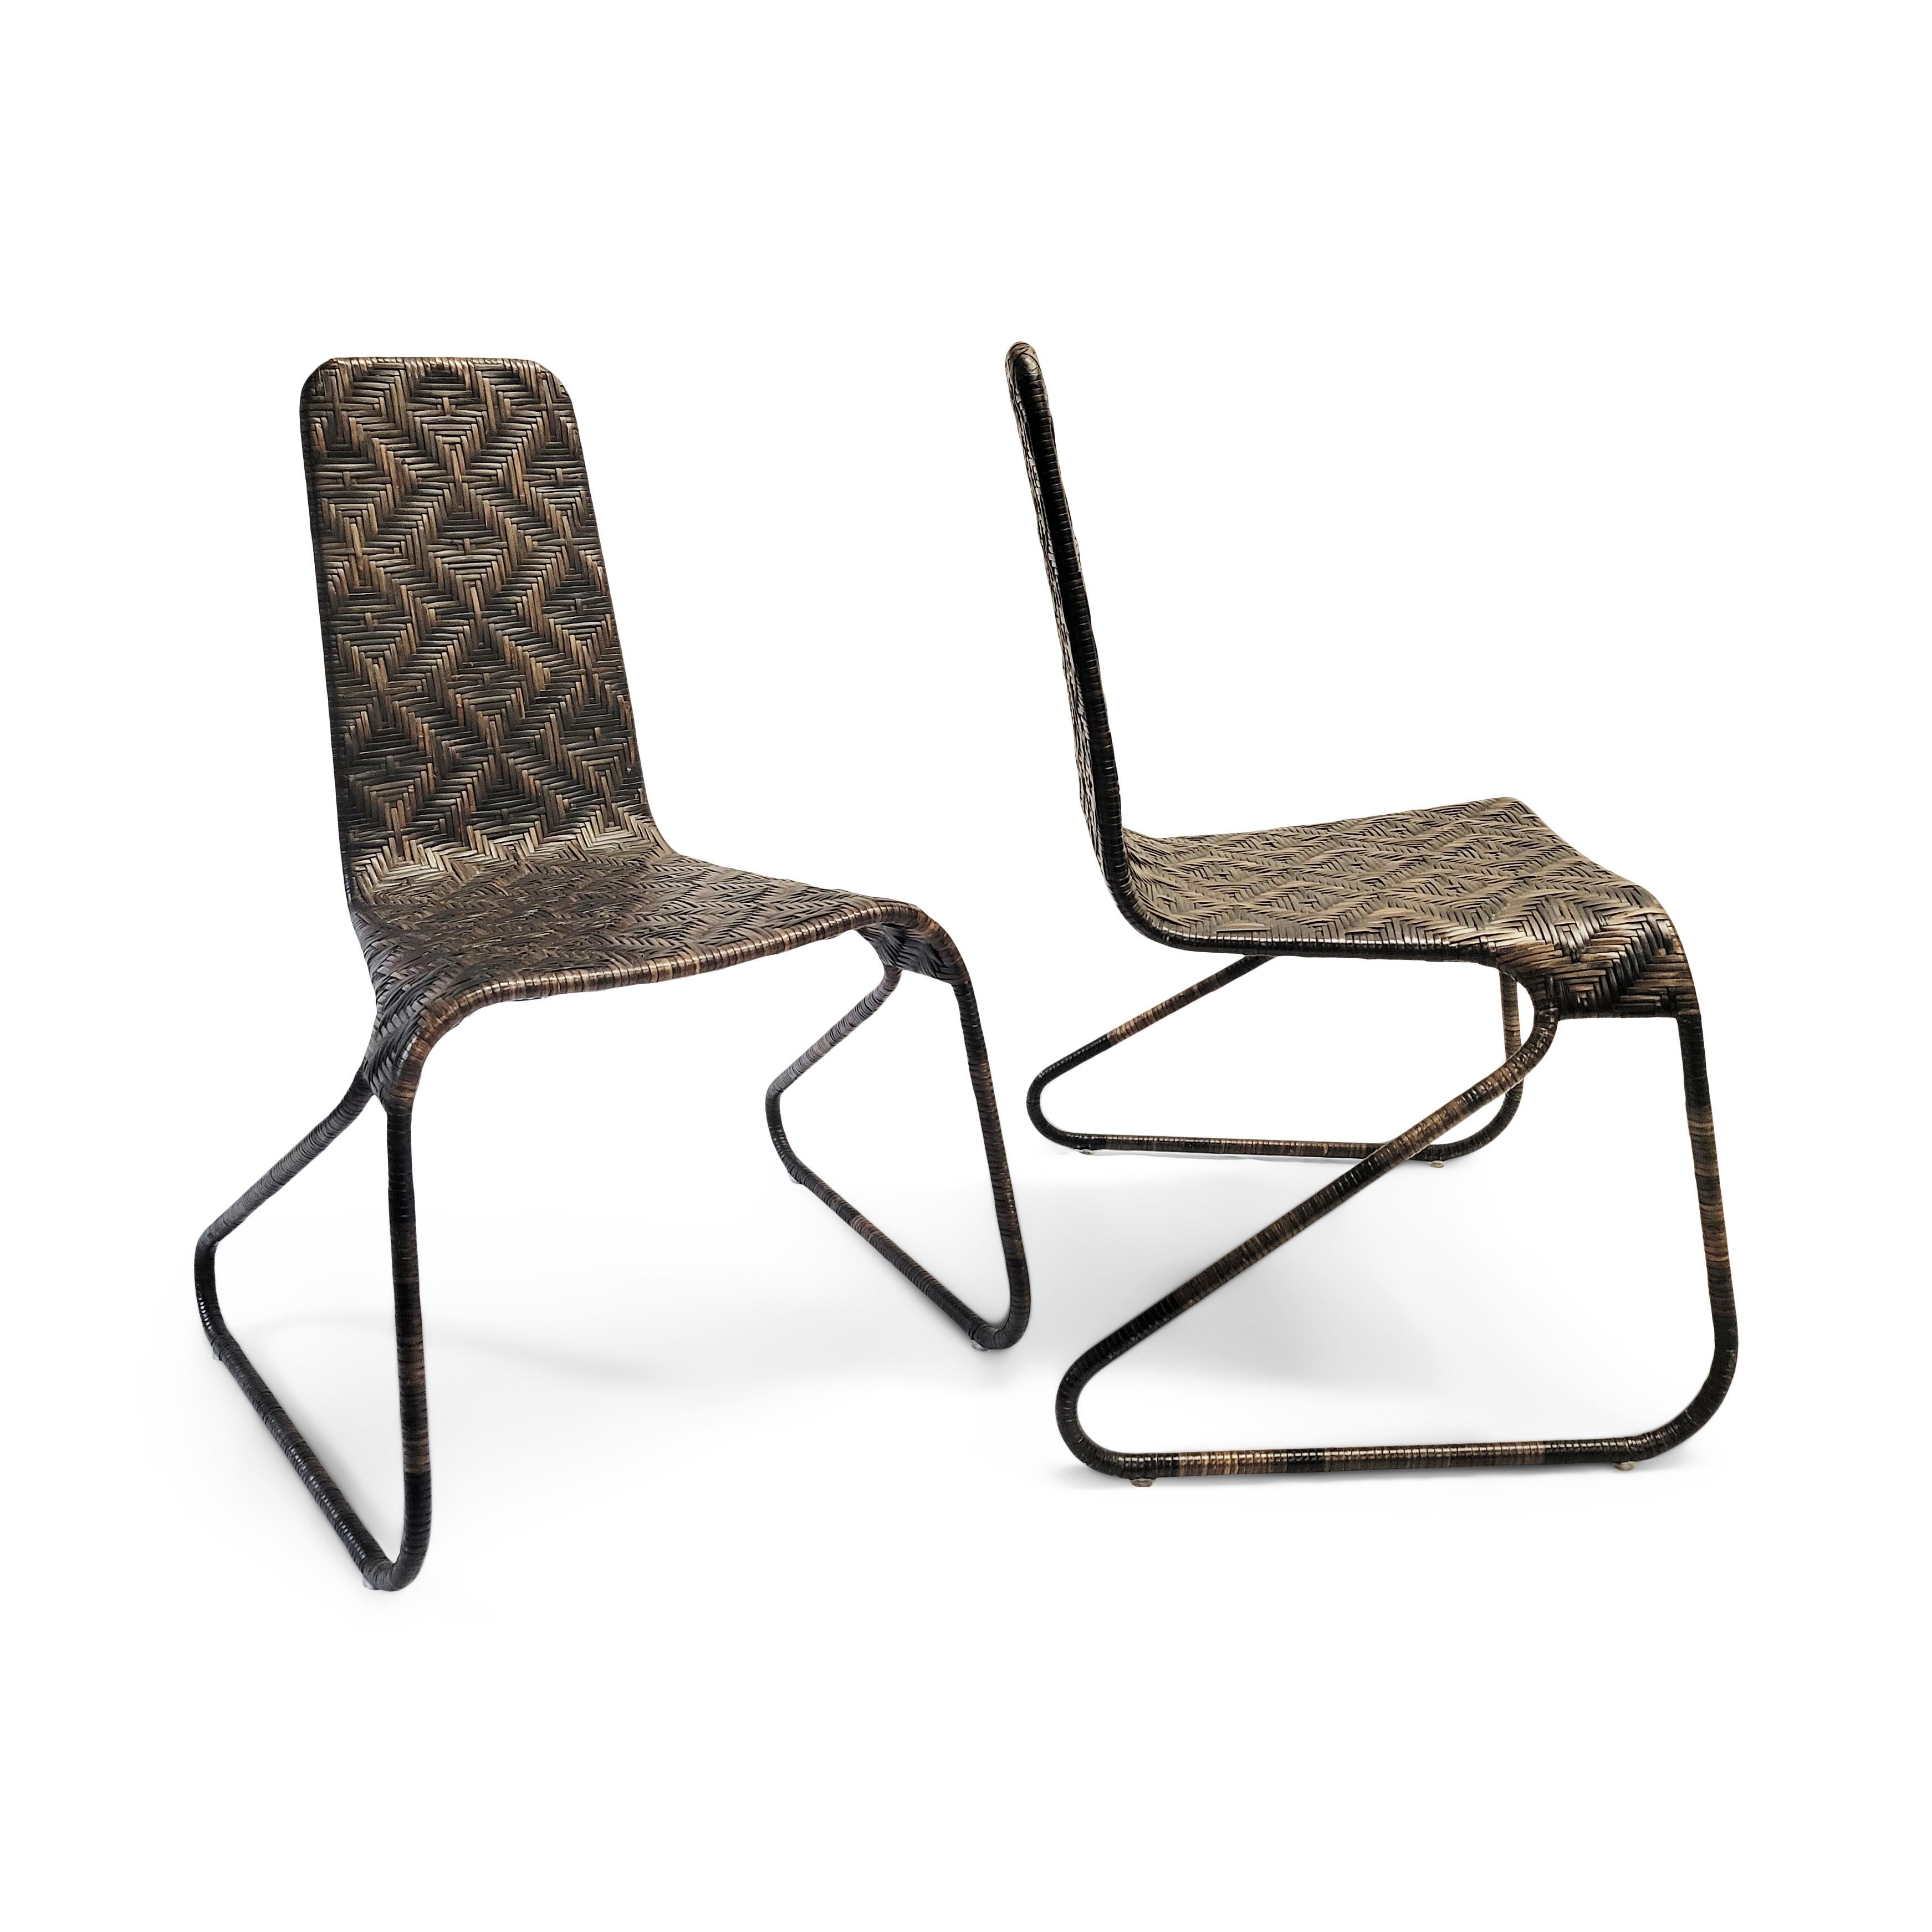 Post-Modern Pair of Flo Chairs and Side Table by Patricia Urquiola for Driade For Sale